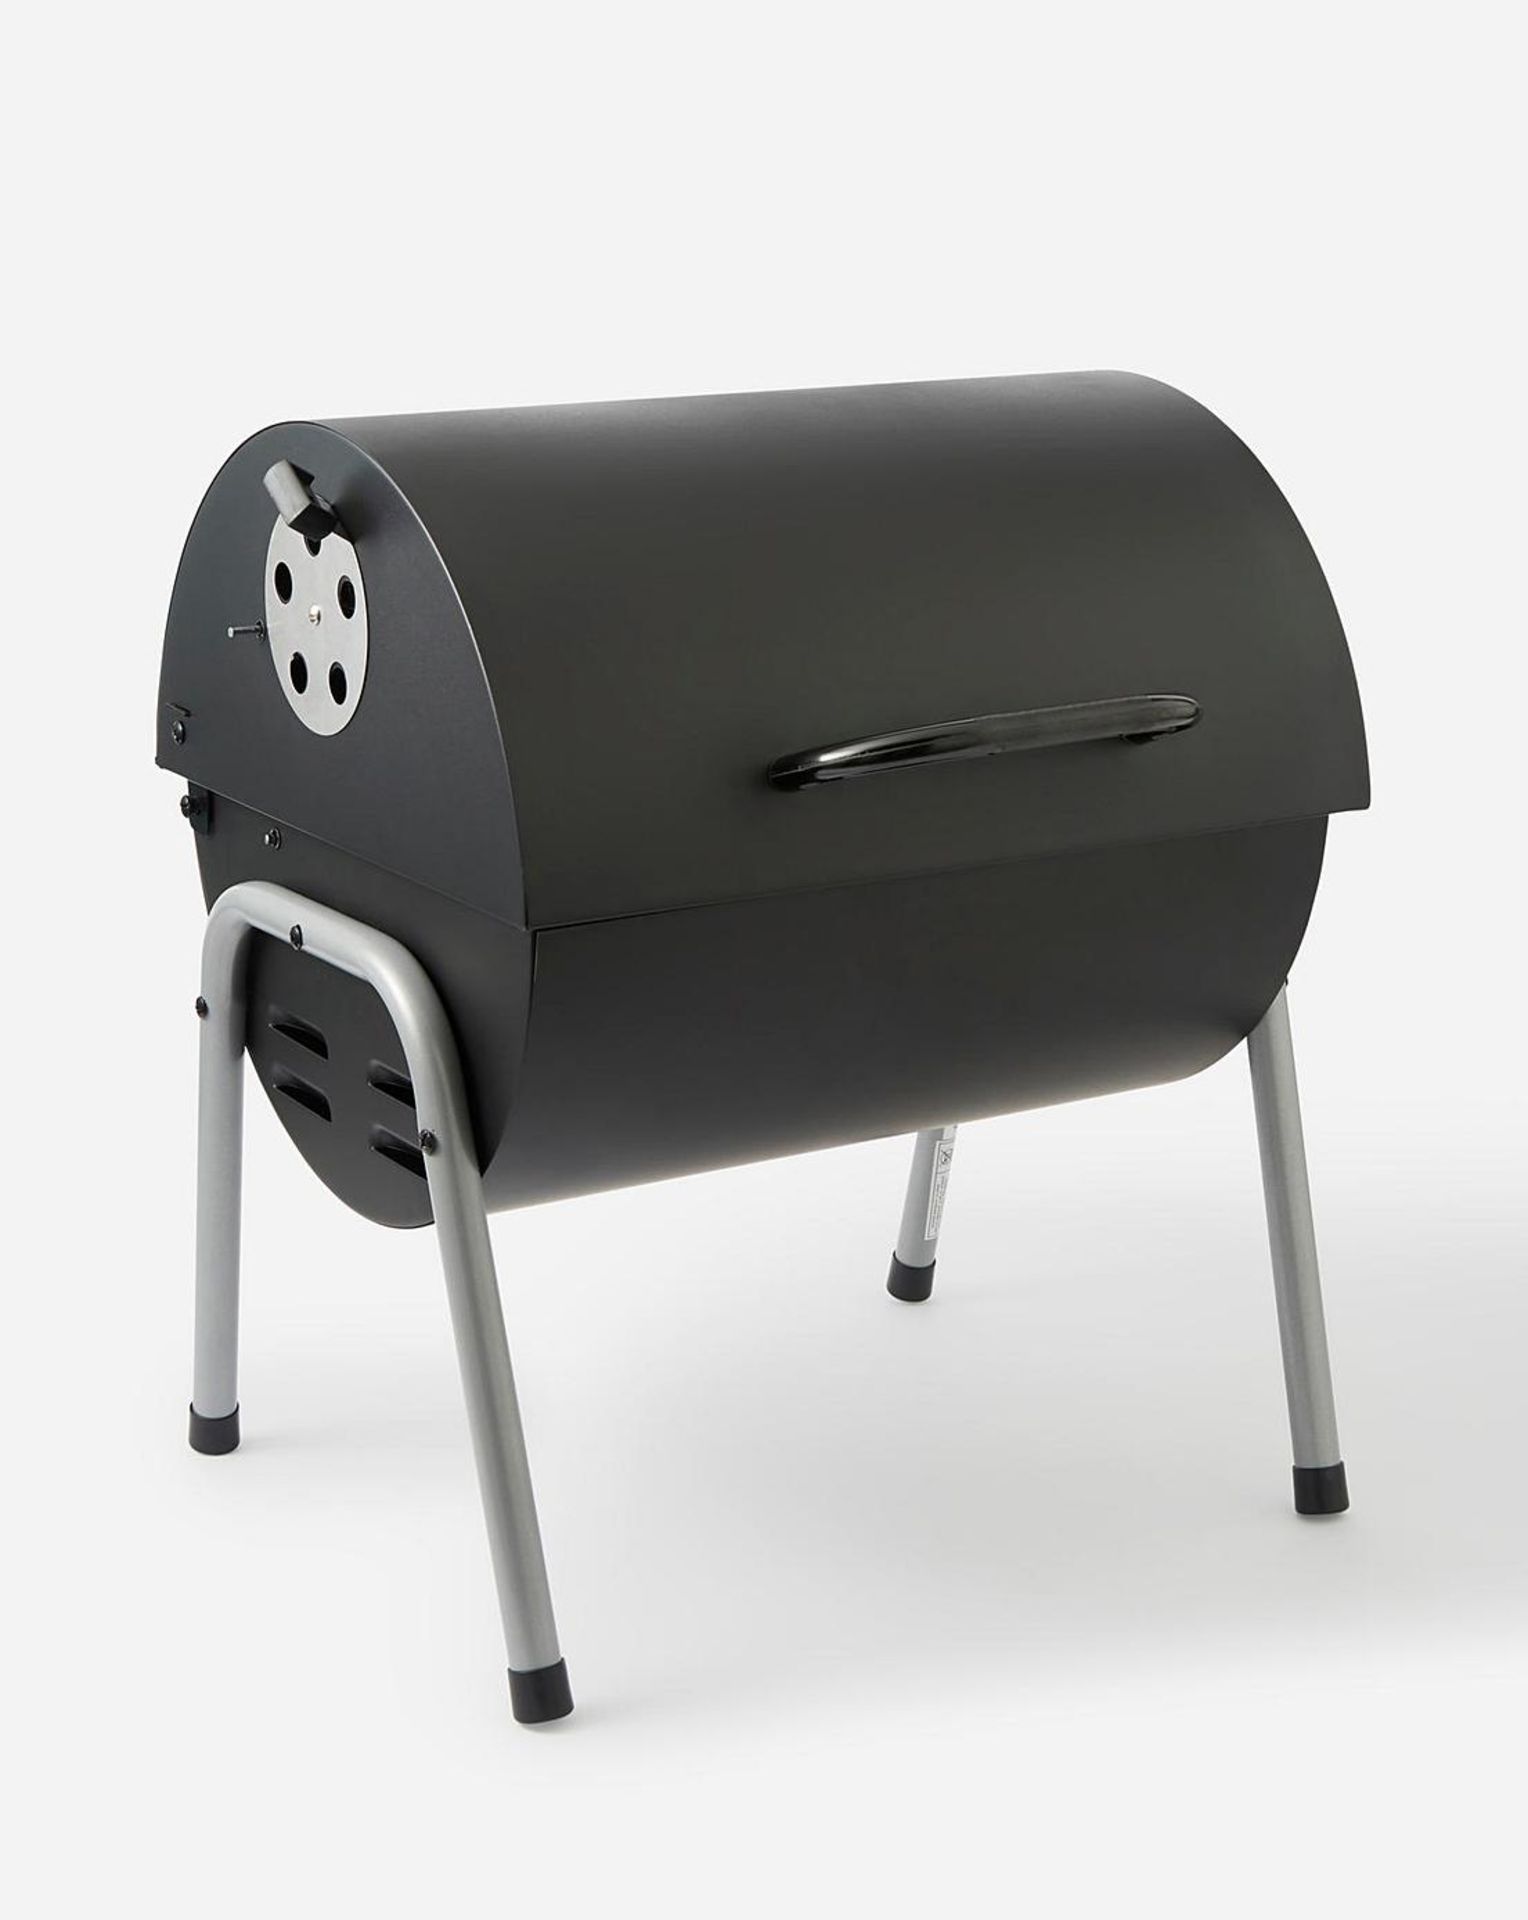 2x BRAND NEW Tabletop Oil Drum Barbeque Grill. RRP £59.99 EACH. Black steel firebowl with enamel - Image 3 of 4